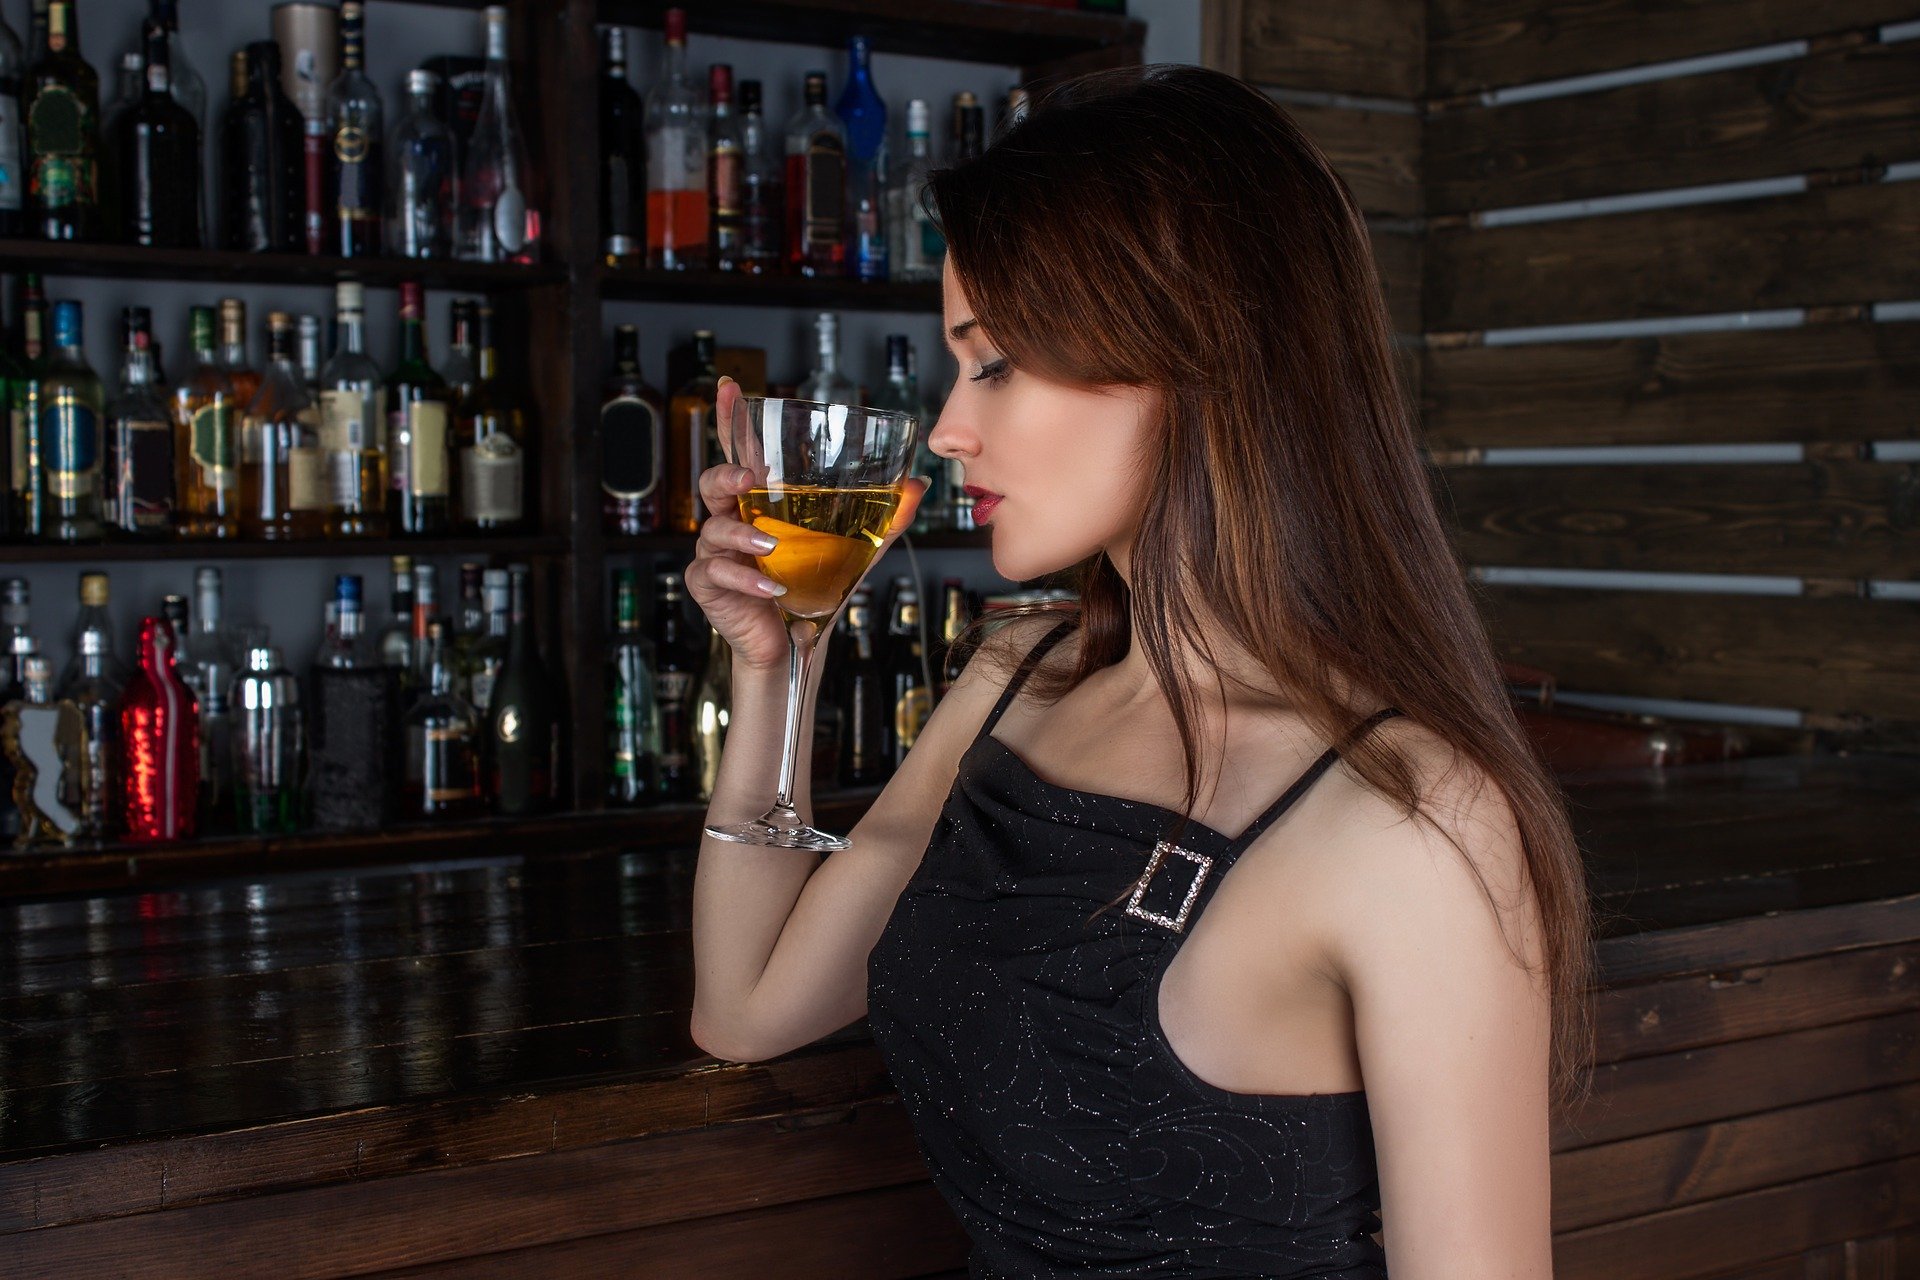 A beautiful young woman sitting alone at the bar drinking. | Photo: Pixabay